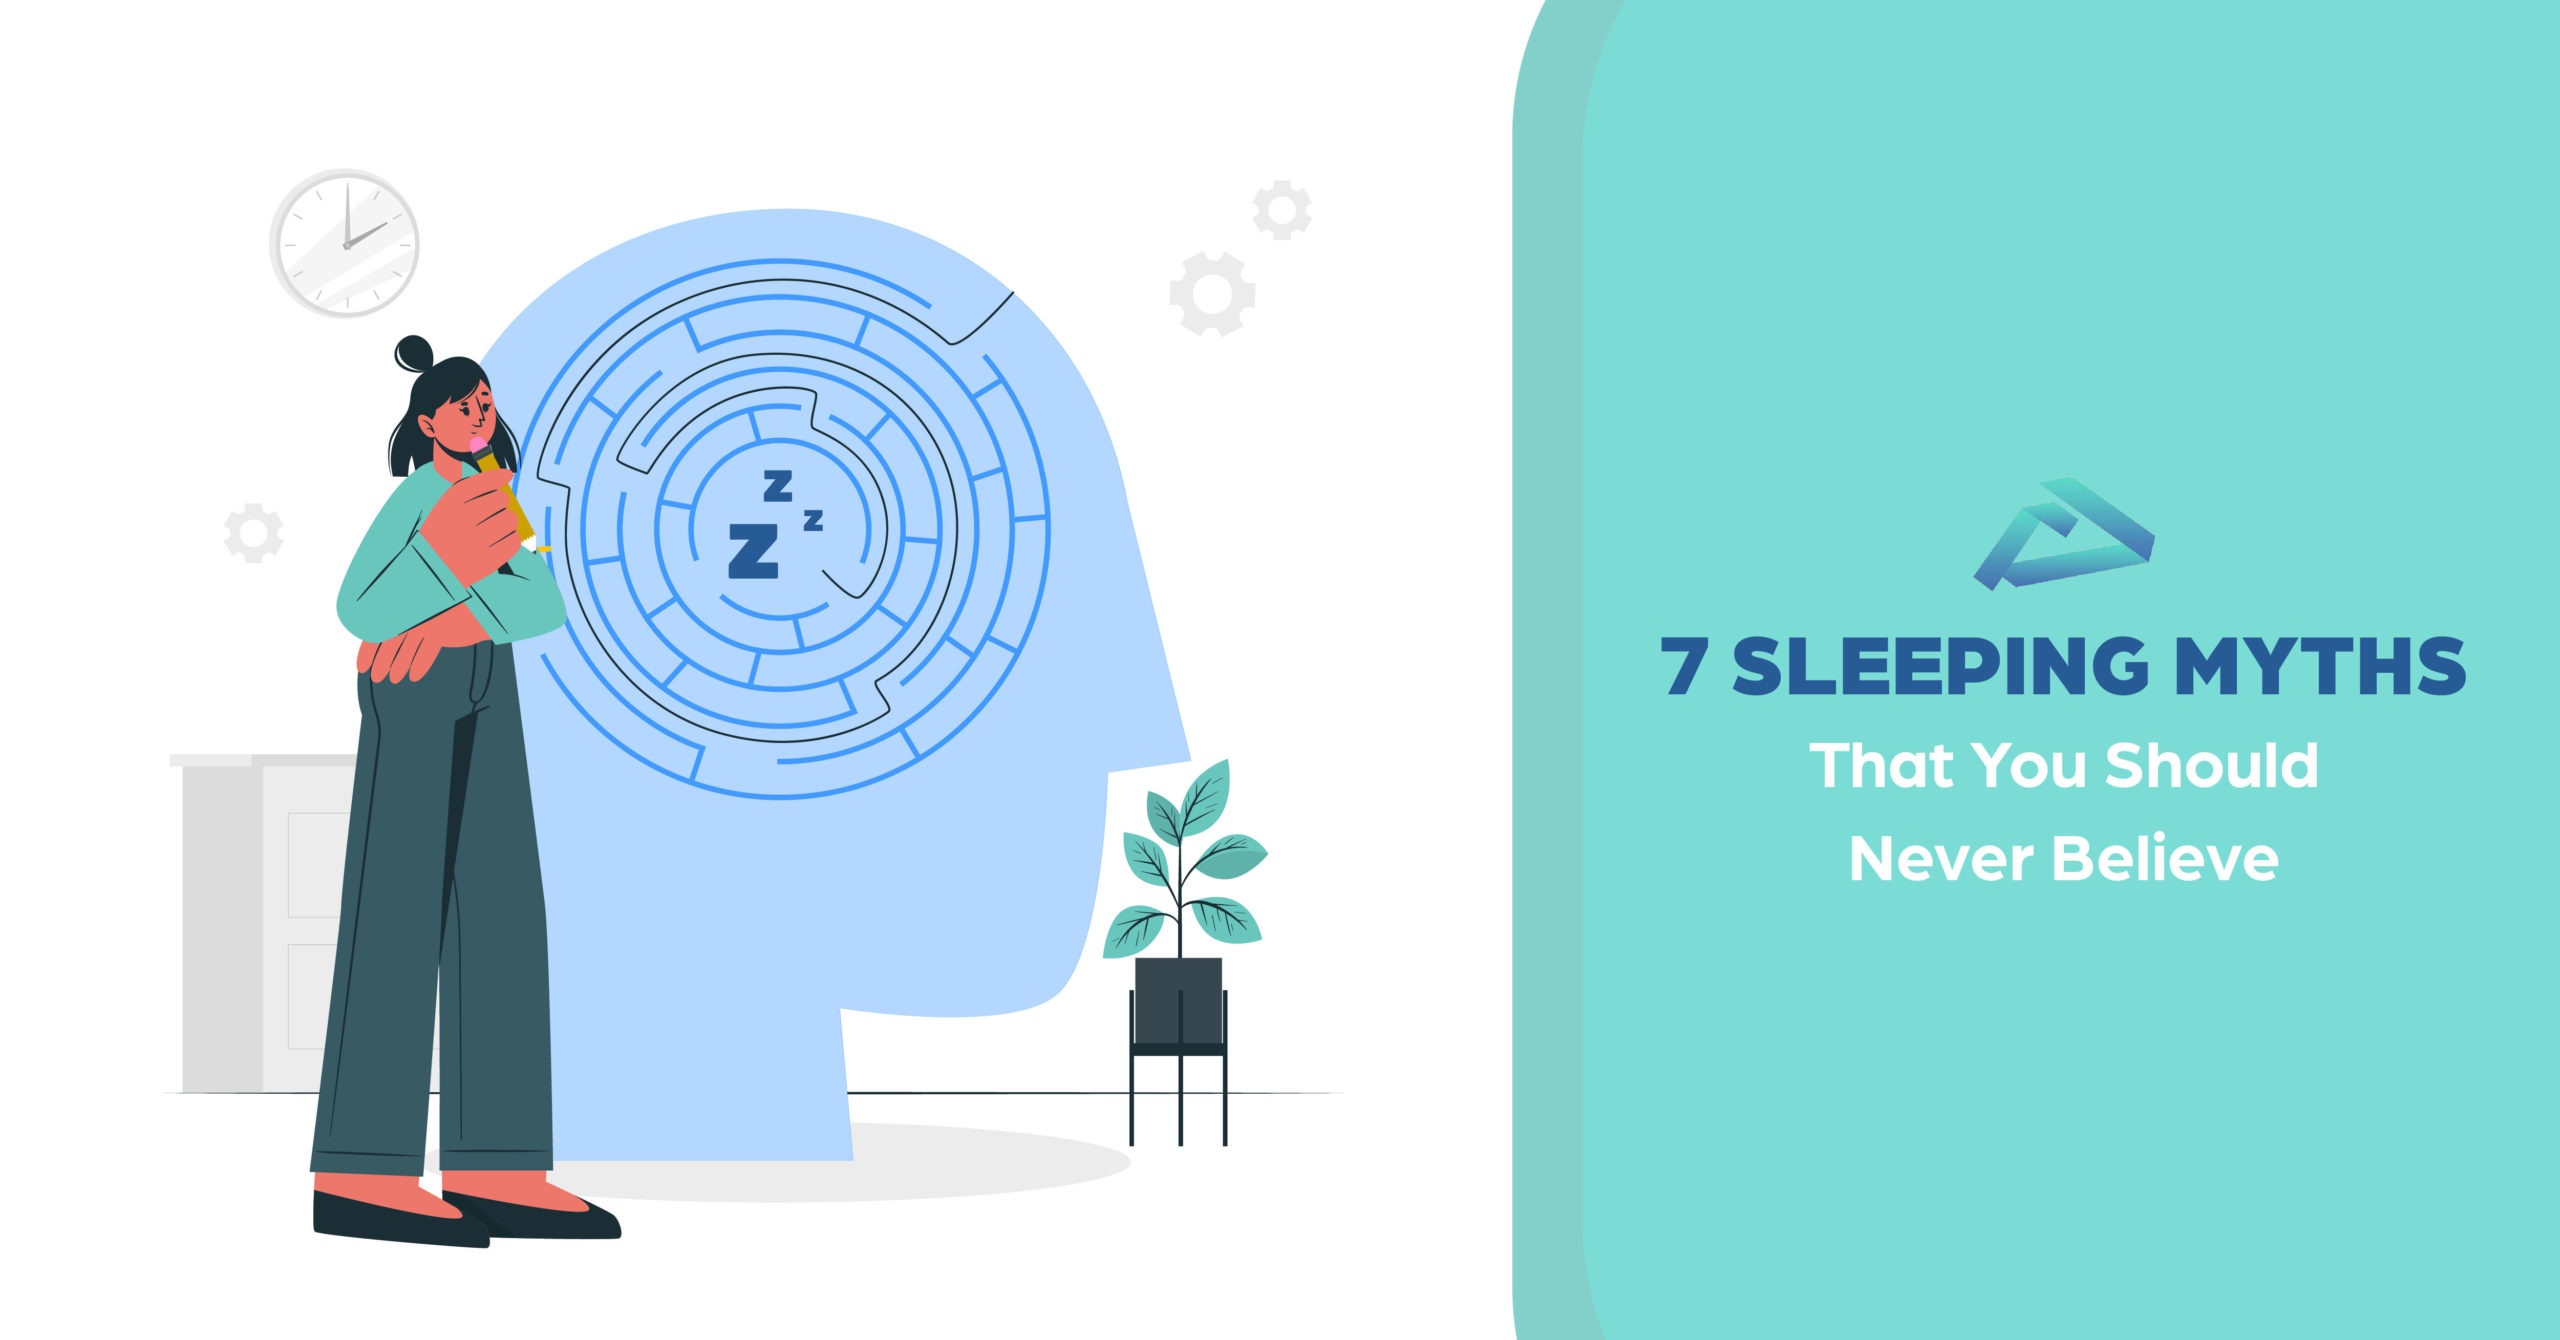 7 Sleeping Myths That You Should Never Believe